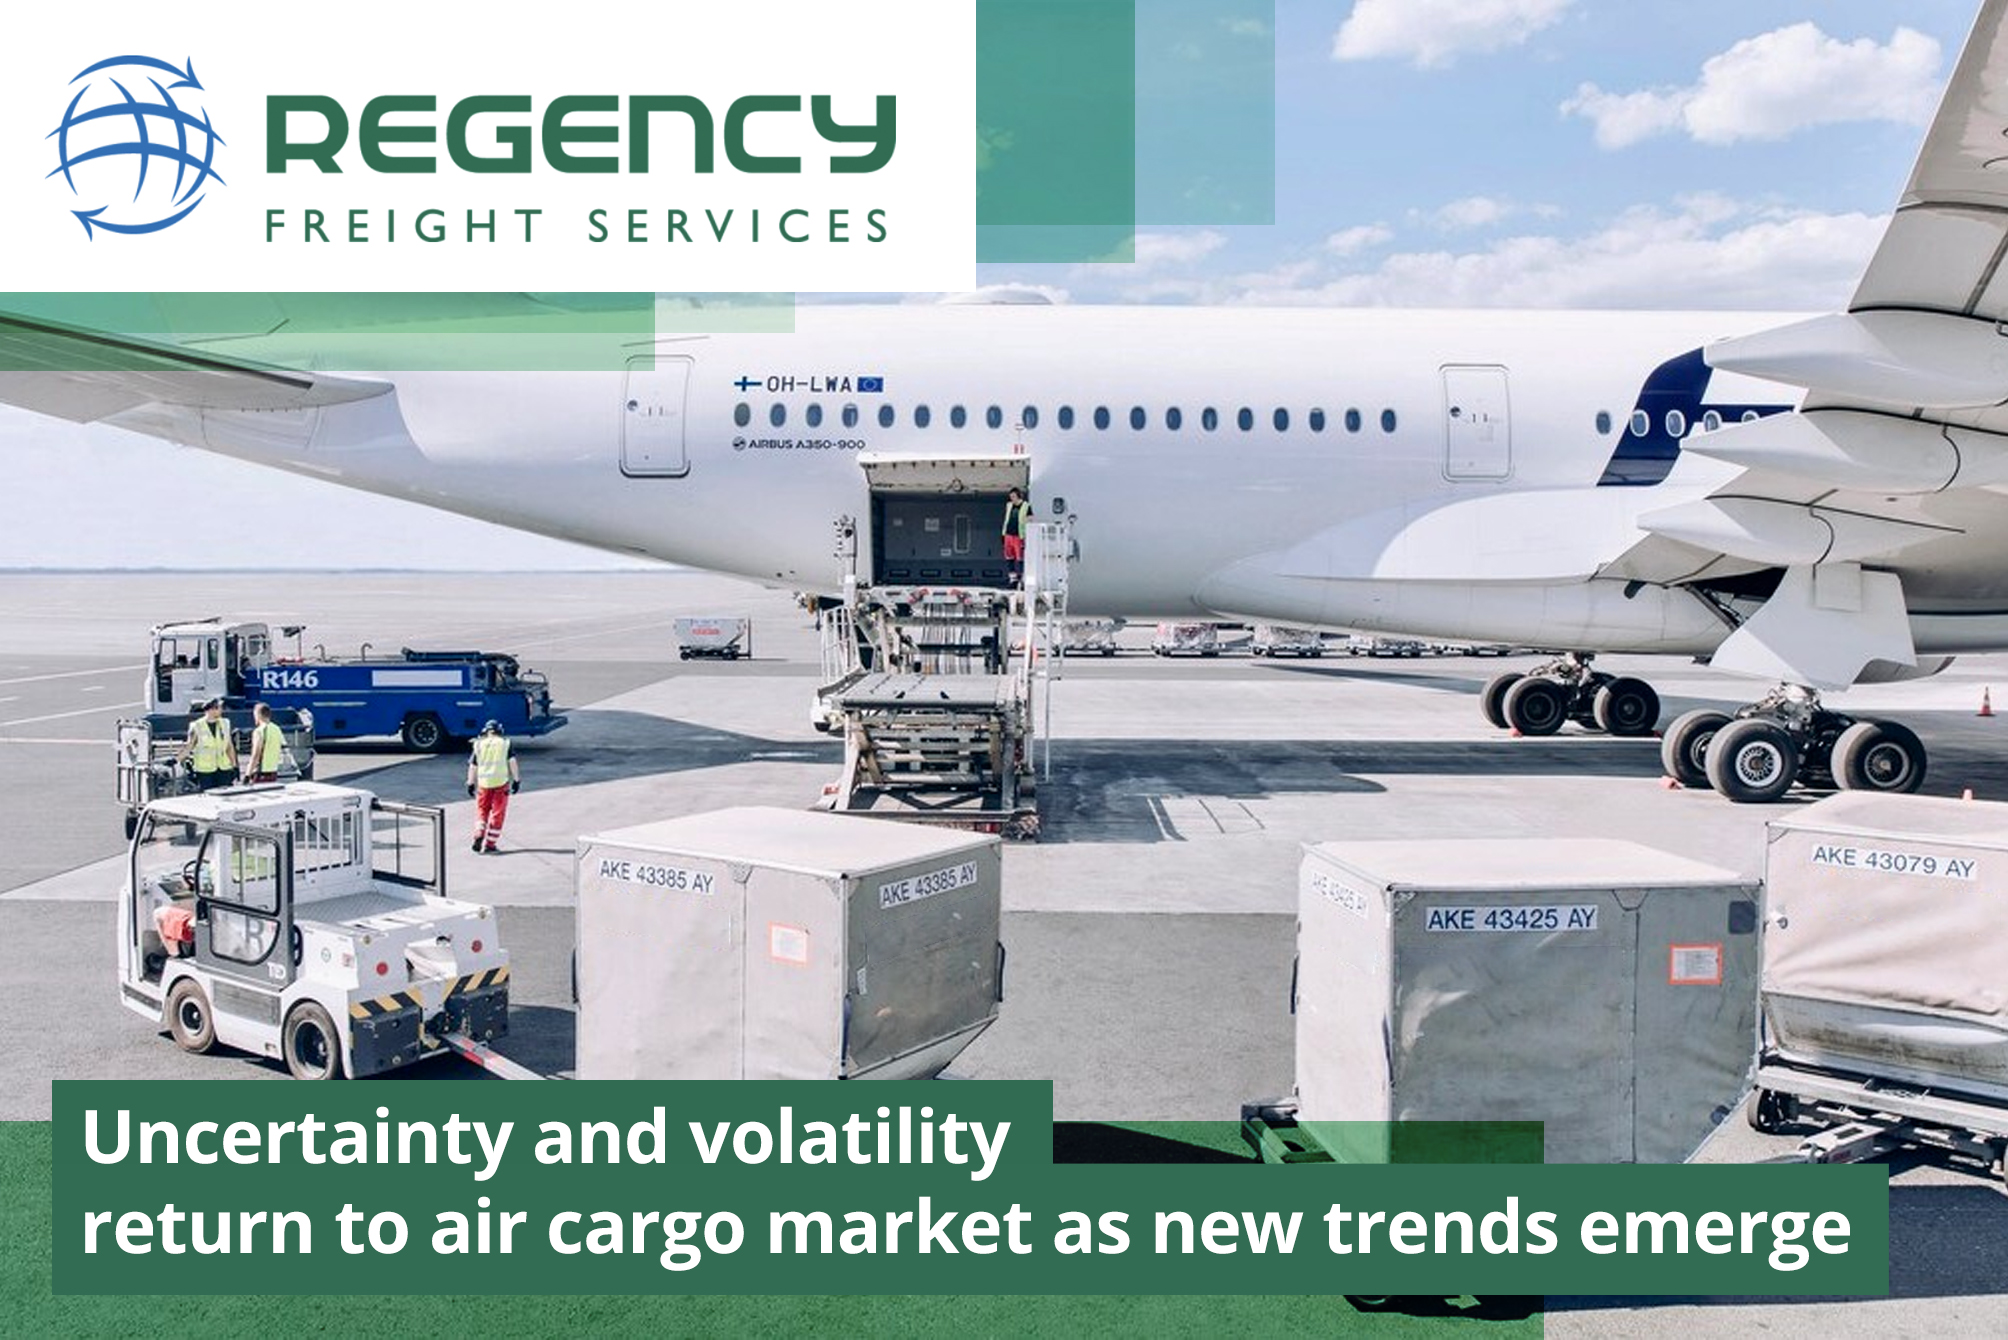 Uncertainty and volatility return to air cargo market as new trends emerge